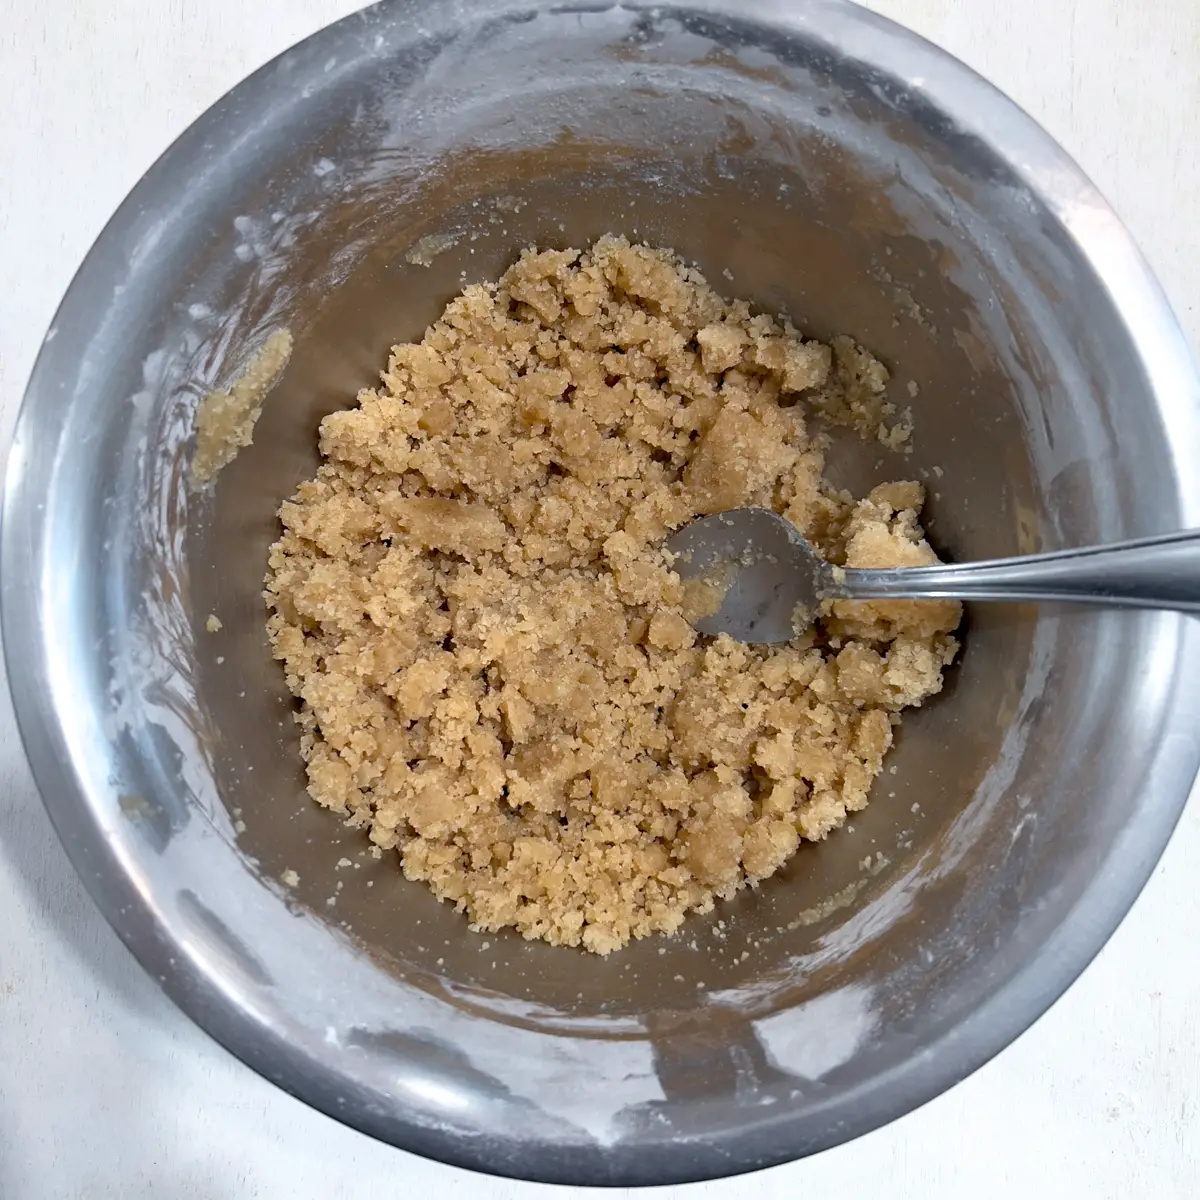 Streusel topping in a bowl